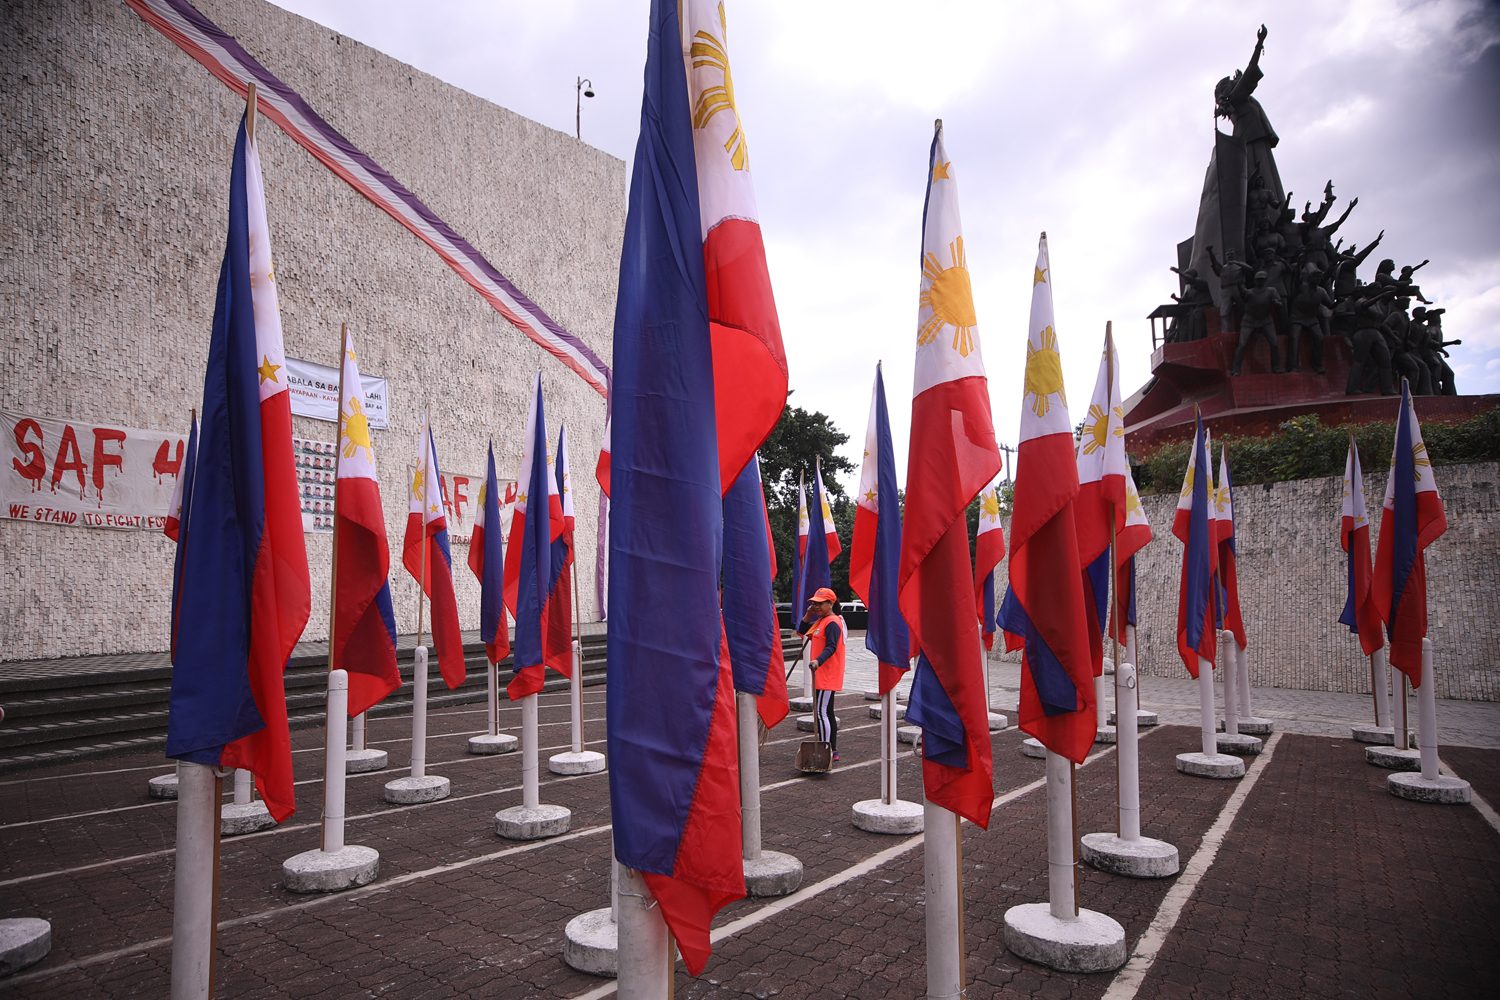 IN PHOTOS: Remembering #SAF44, 4 years later